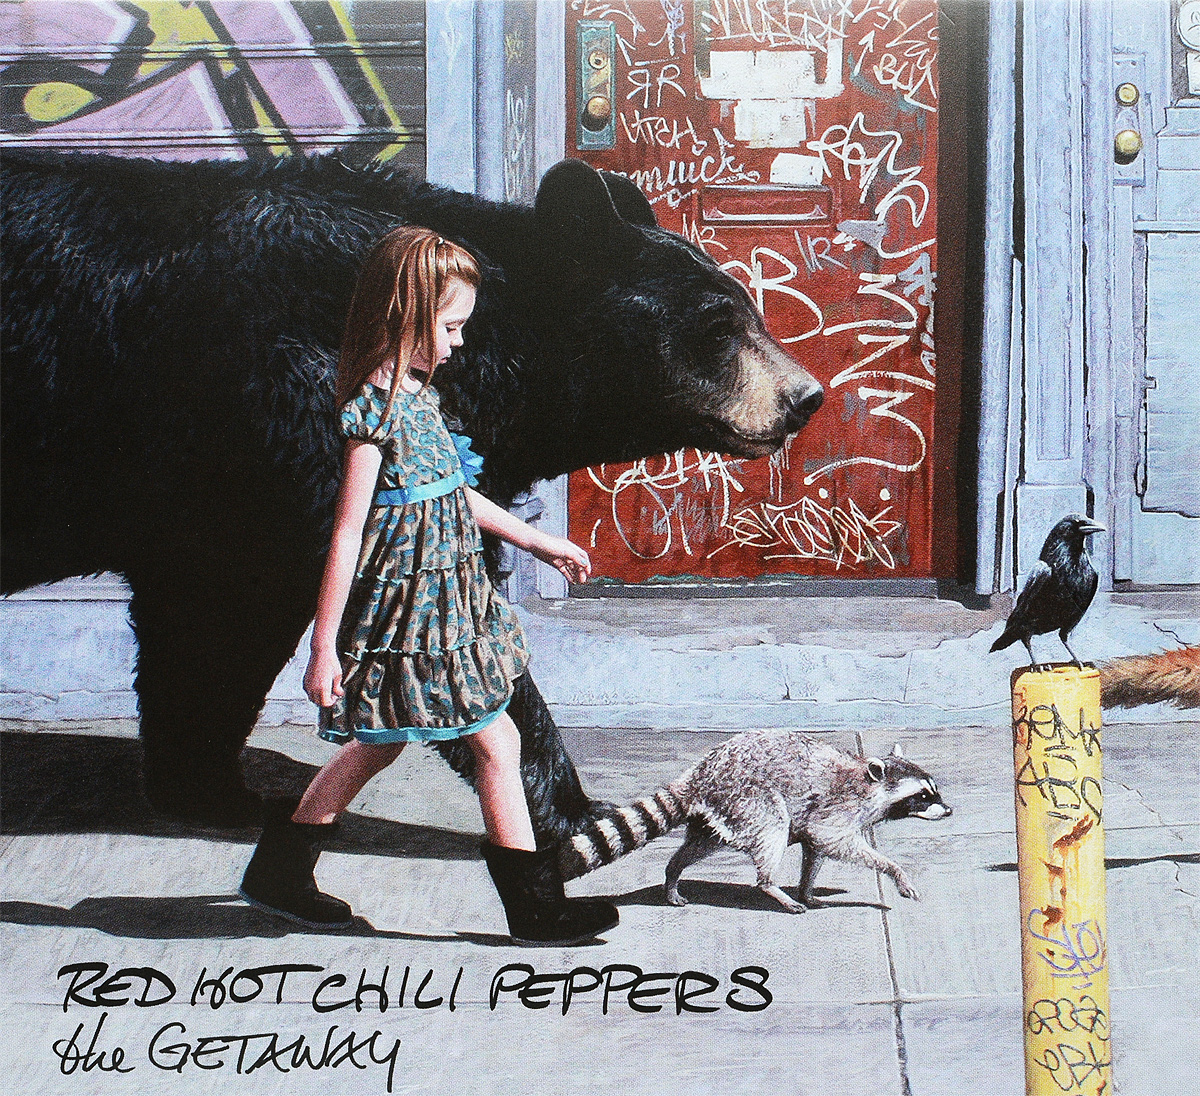 Red Hot Chili Peppers. The Getaway